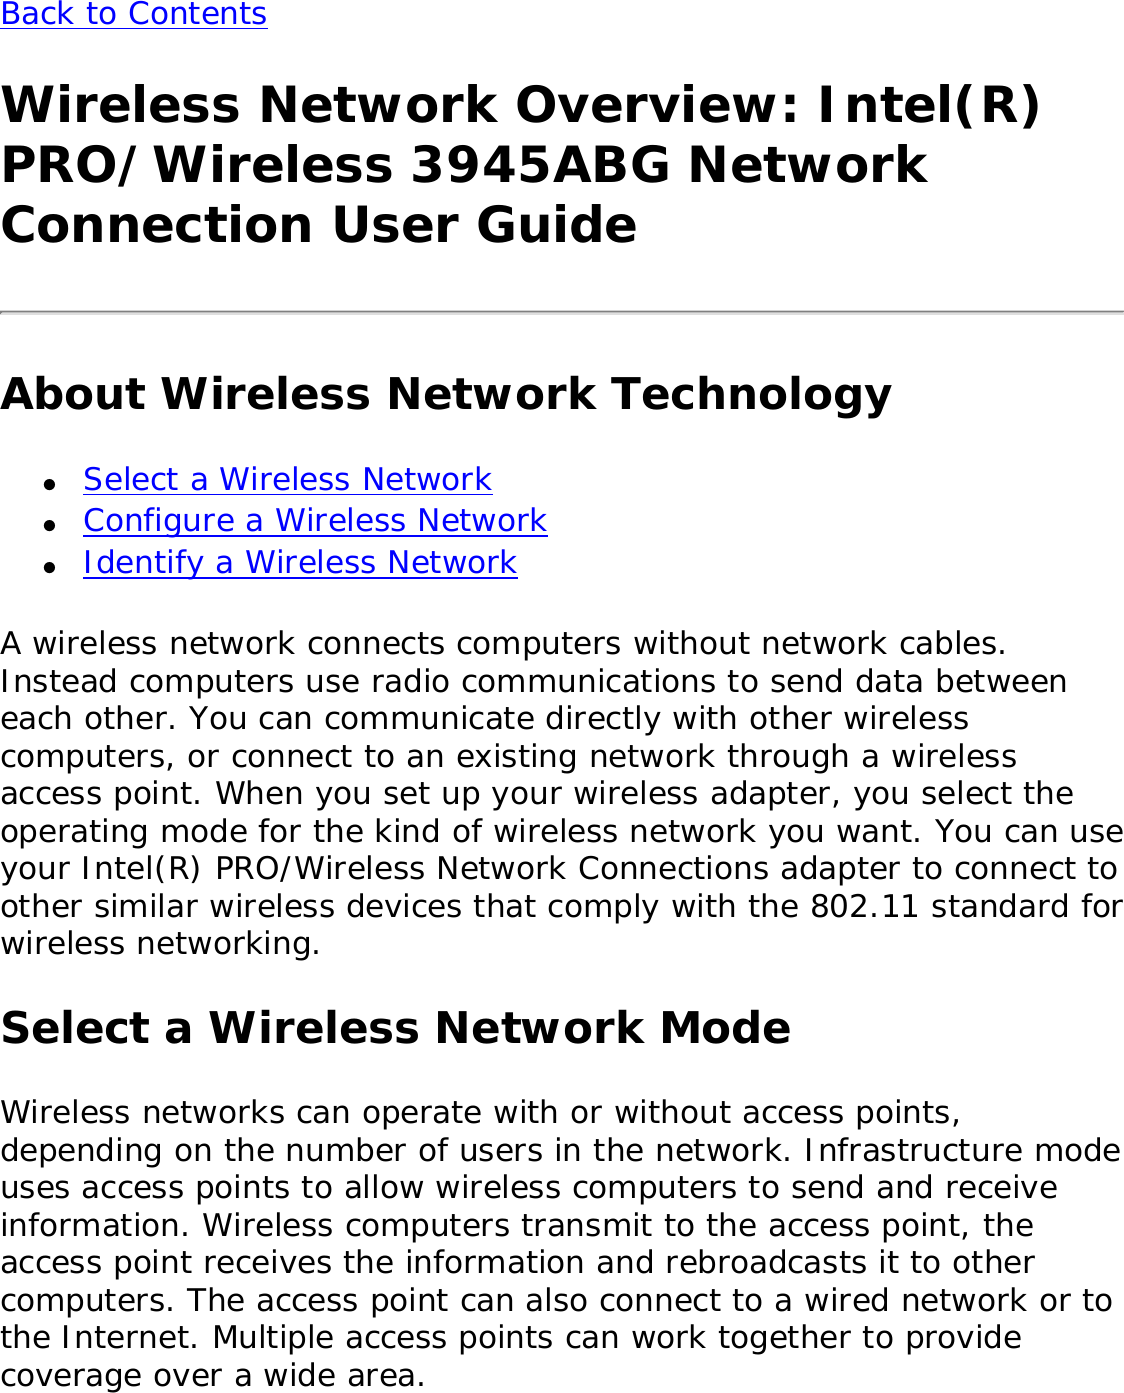 Back to Contents Wireless Network Overview: Intel(R) PRO/Wireless 3945ABG Network Connection User GuideAbout Wireless Network Technology●     Select a Wireless Network●     Configure a Wireless Network●     Identify a Wireless NetworkA wireless network connects computers without network cables. Instead computers use radio communications to send data between each other. You can communicate directly with other wireless computers, or connect to an existing network through a wireless access point. When you set up your wireless adapter, you select the operating mode for the kind of wireless network you want. You can use your Intel(R) PRO/Wireless Network Connections adapter to connect to other similar wireless devices that comply with the 802.11 standard for wireless networking. Select a Wireless Network ModeWireless networks can operate with or without access points, depending on the number of users in the network. Infrastructure mode uses access points to allow wireless computers to send and receive information. Wireless computers transmit to the access point, the access point receives the information and rebroadcasts it to other computers. The access point can also connect to a wired network or to the Internet. Multiple access points can work together to provide coverage over a wide area. 